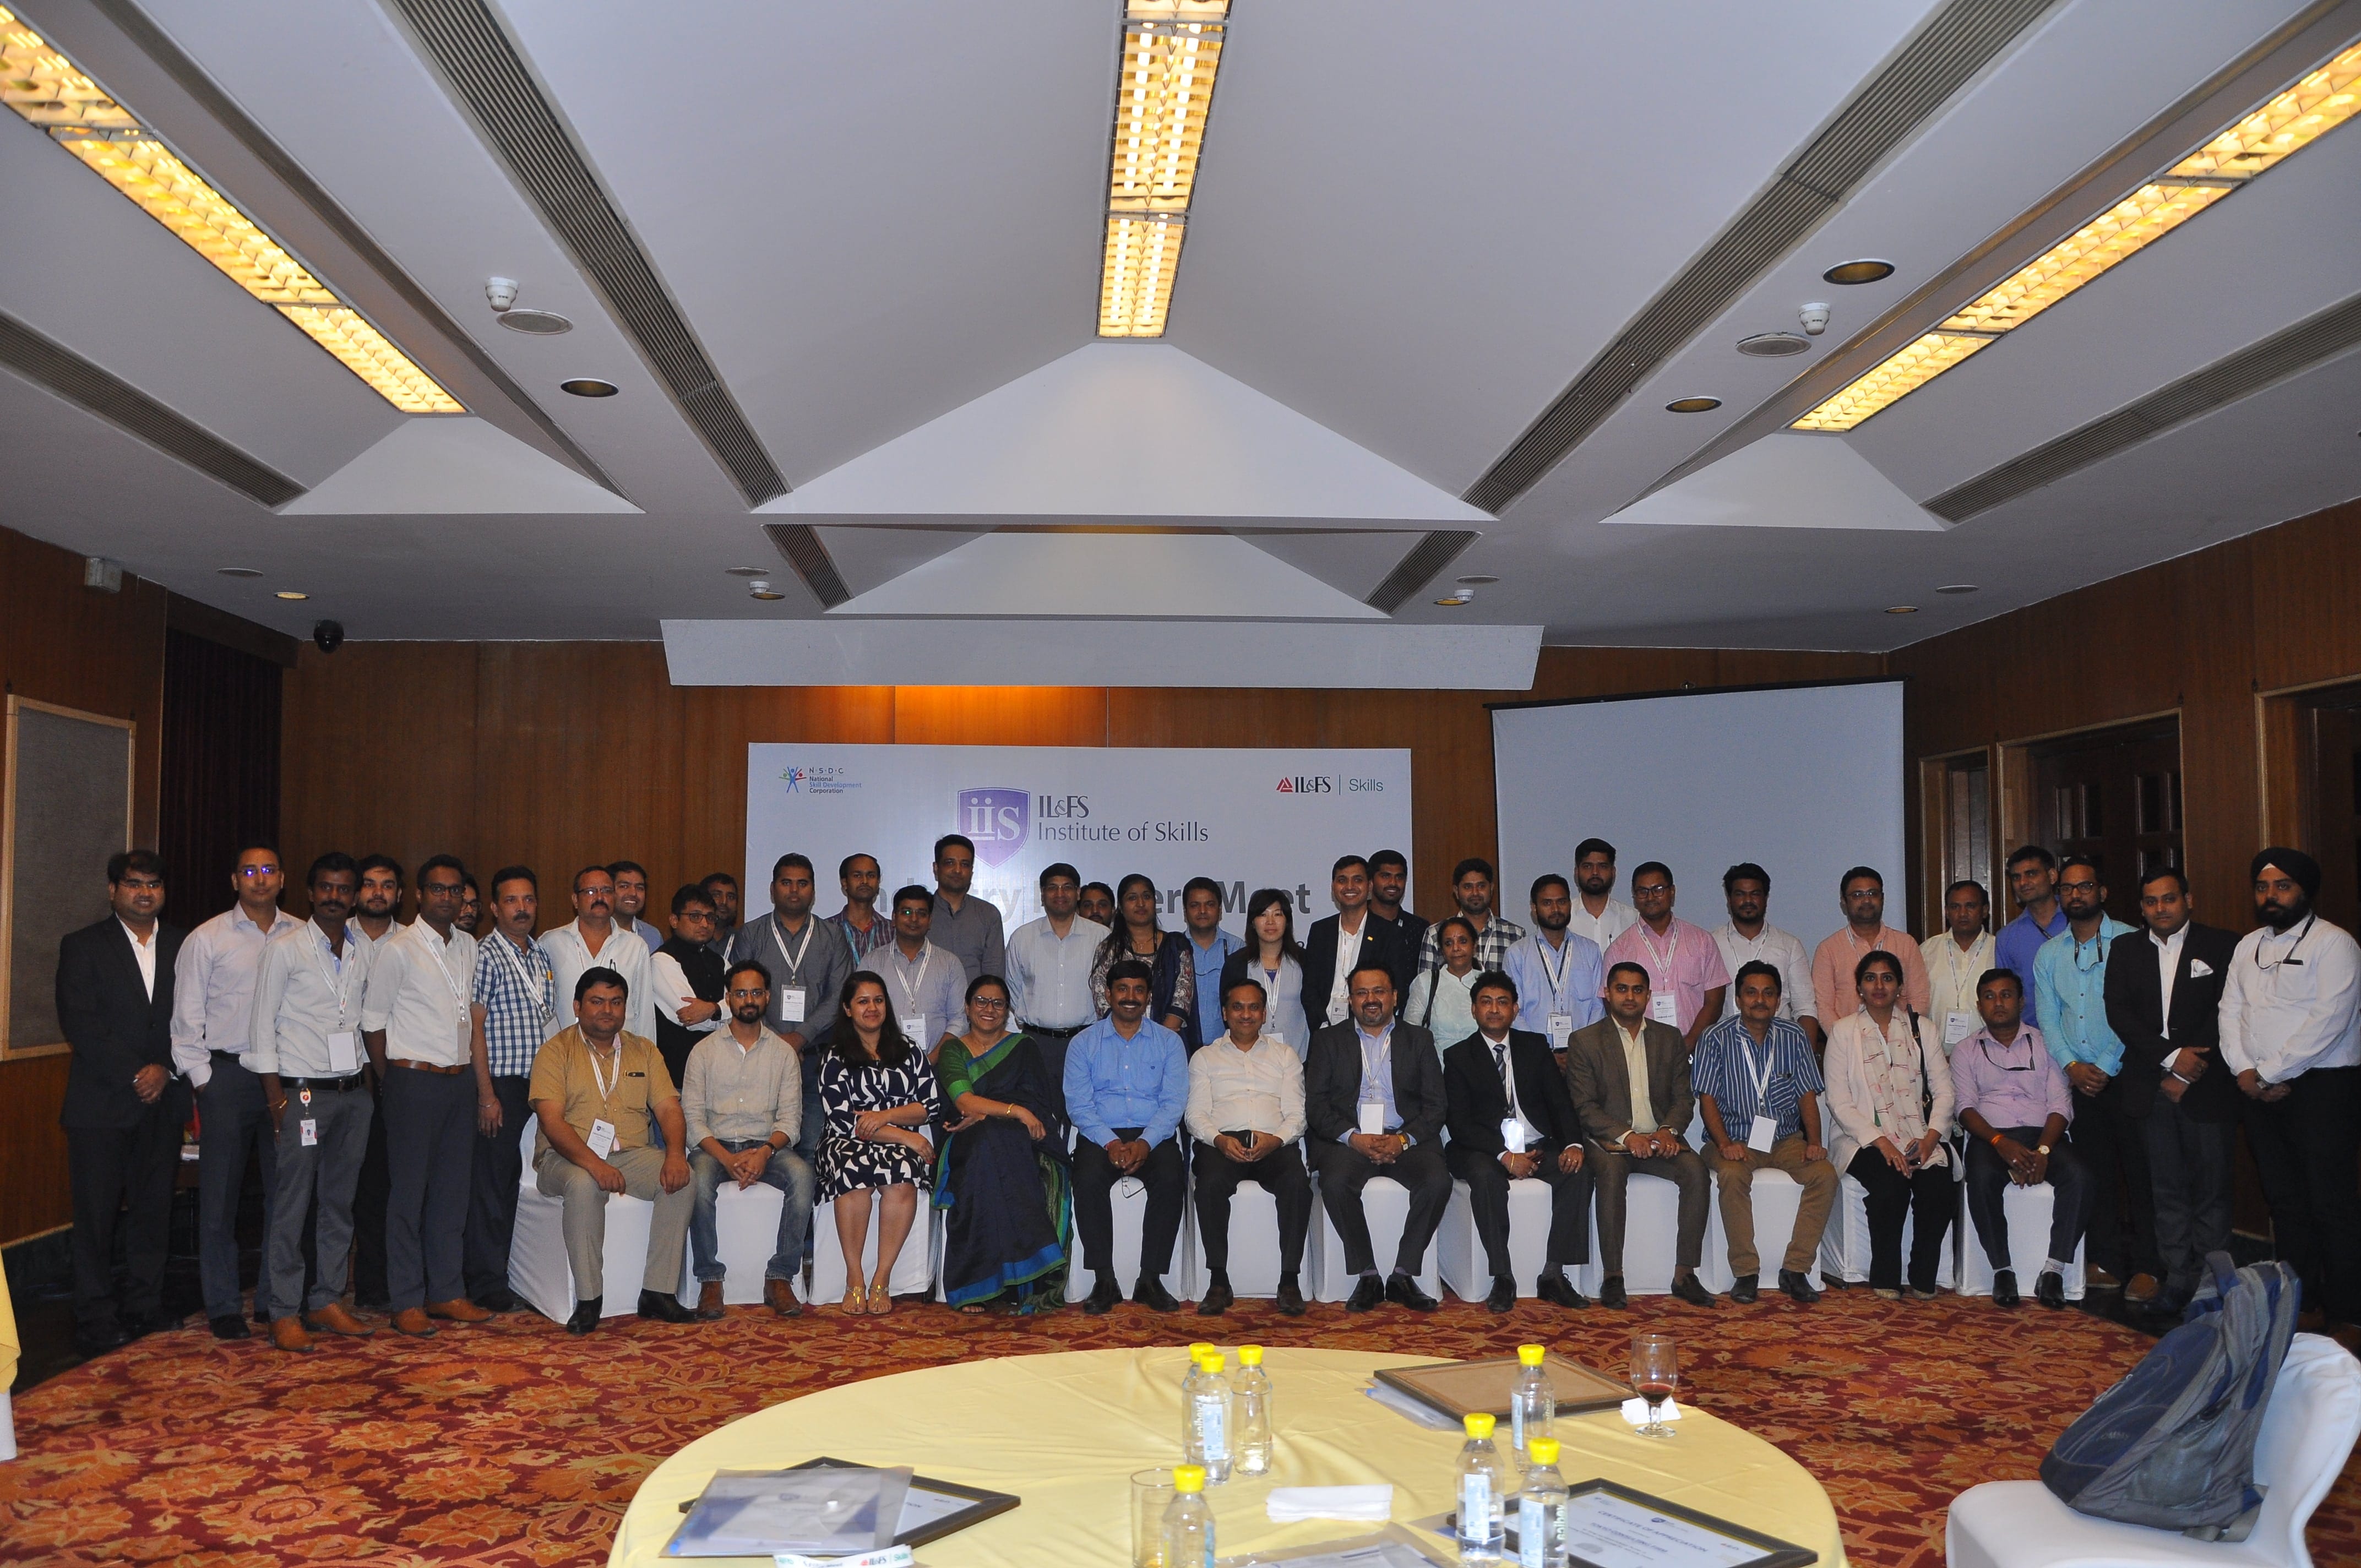 IL&FS Skills Development Corporation Limited (IL&FS Skills) organizes an Industry Partner’s Meet in the capital to acknowledge and recognize the contribution of some of the Company’s key industry partners